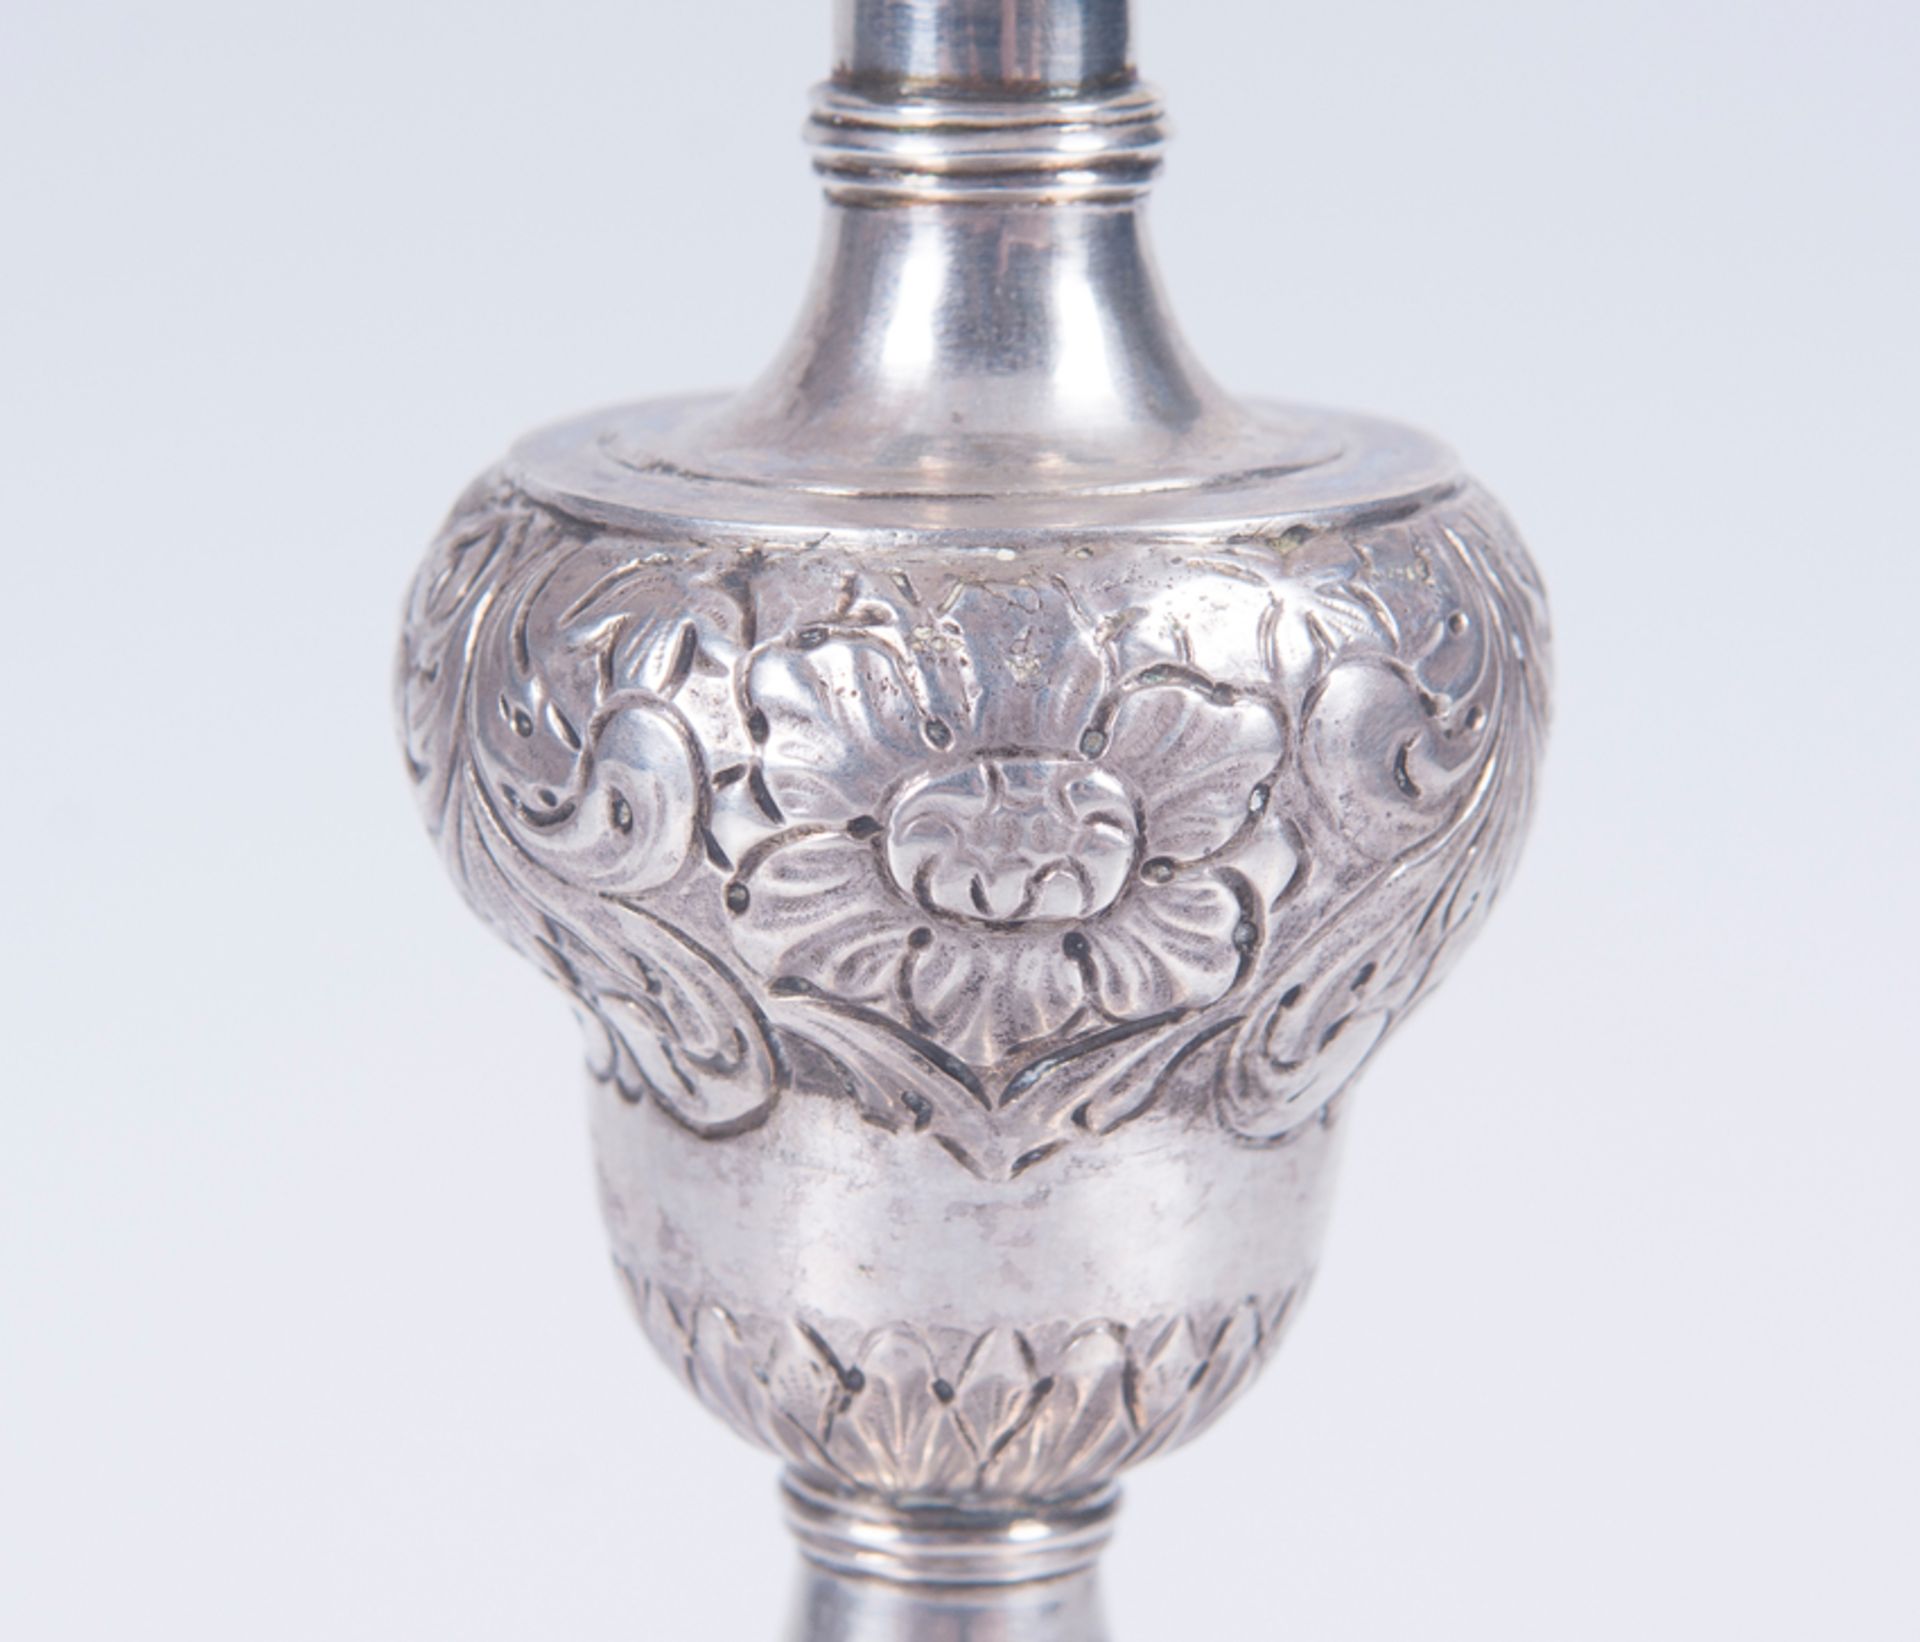 Embossed and chased silver chalice with a silver vermeil interior. Possibly Mexican. Late 16th cent - Image 5 of 8